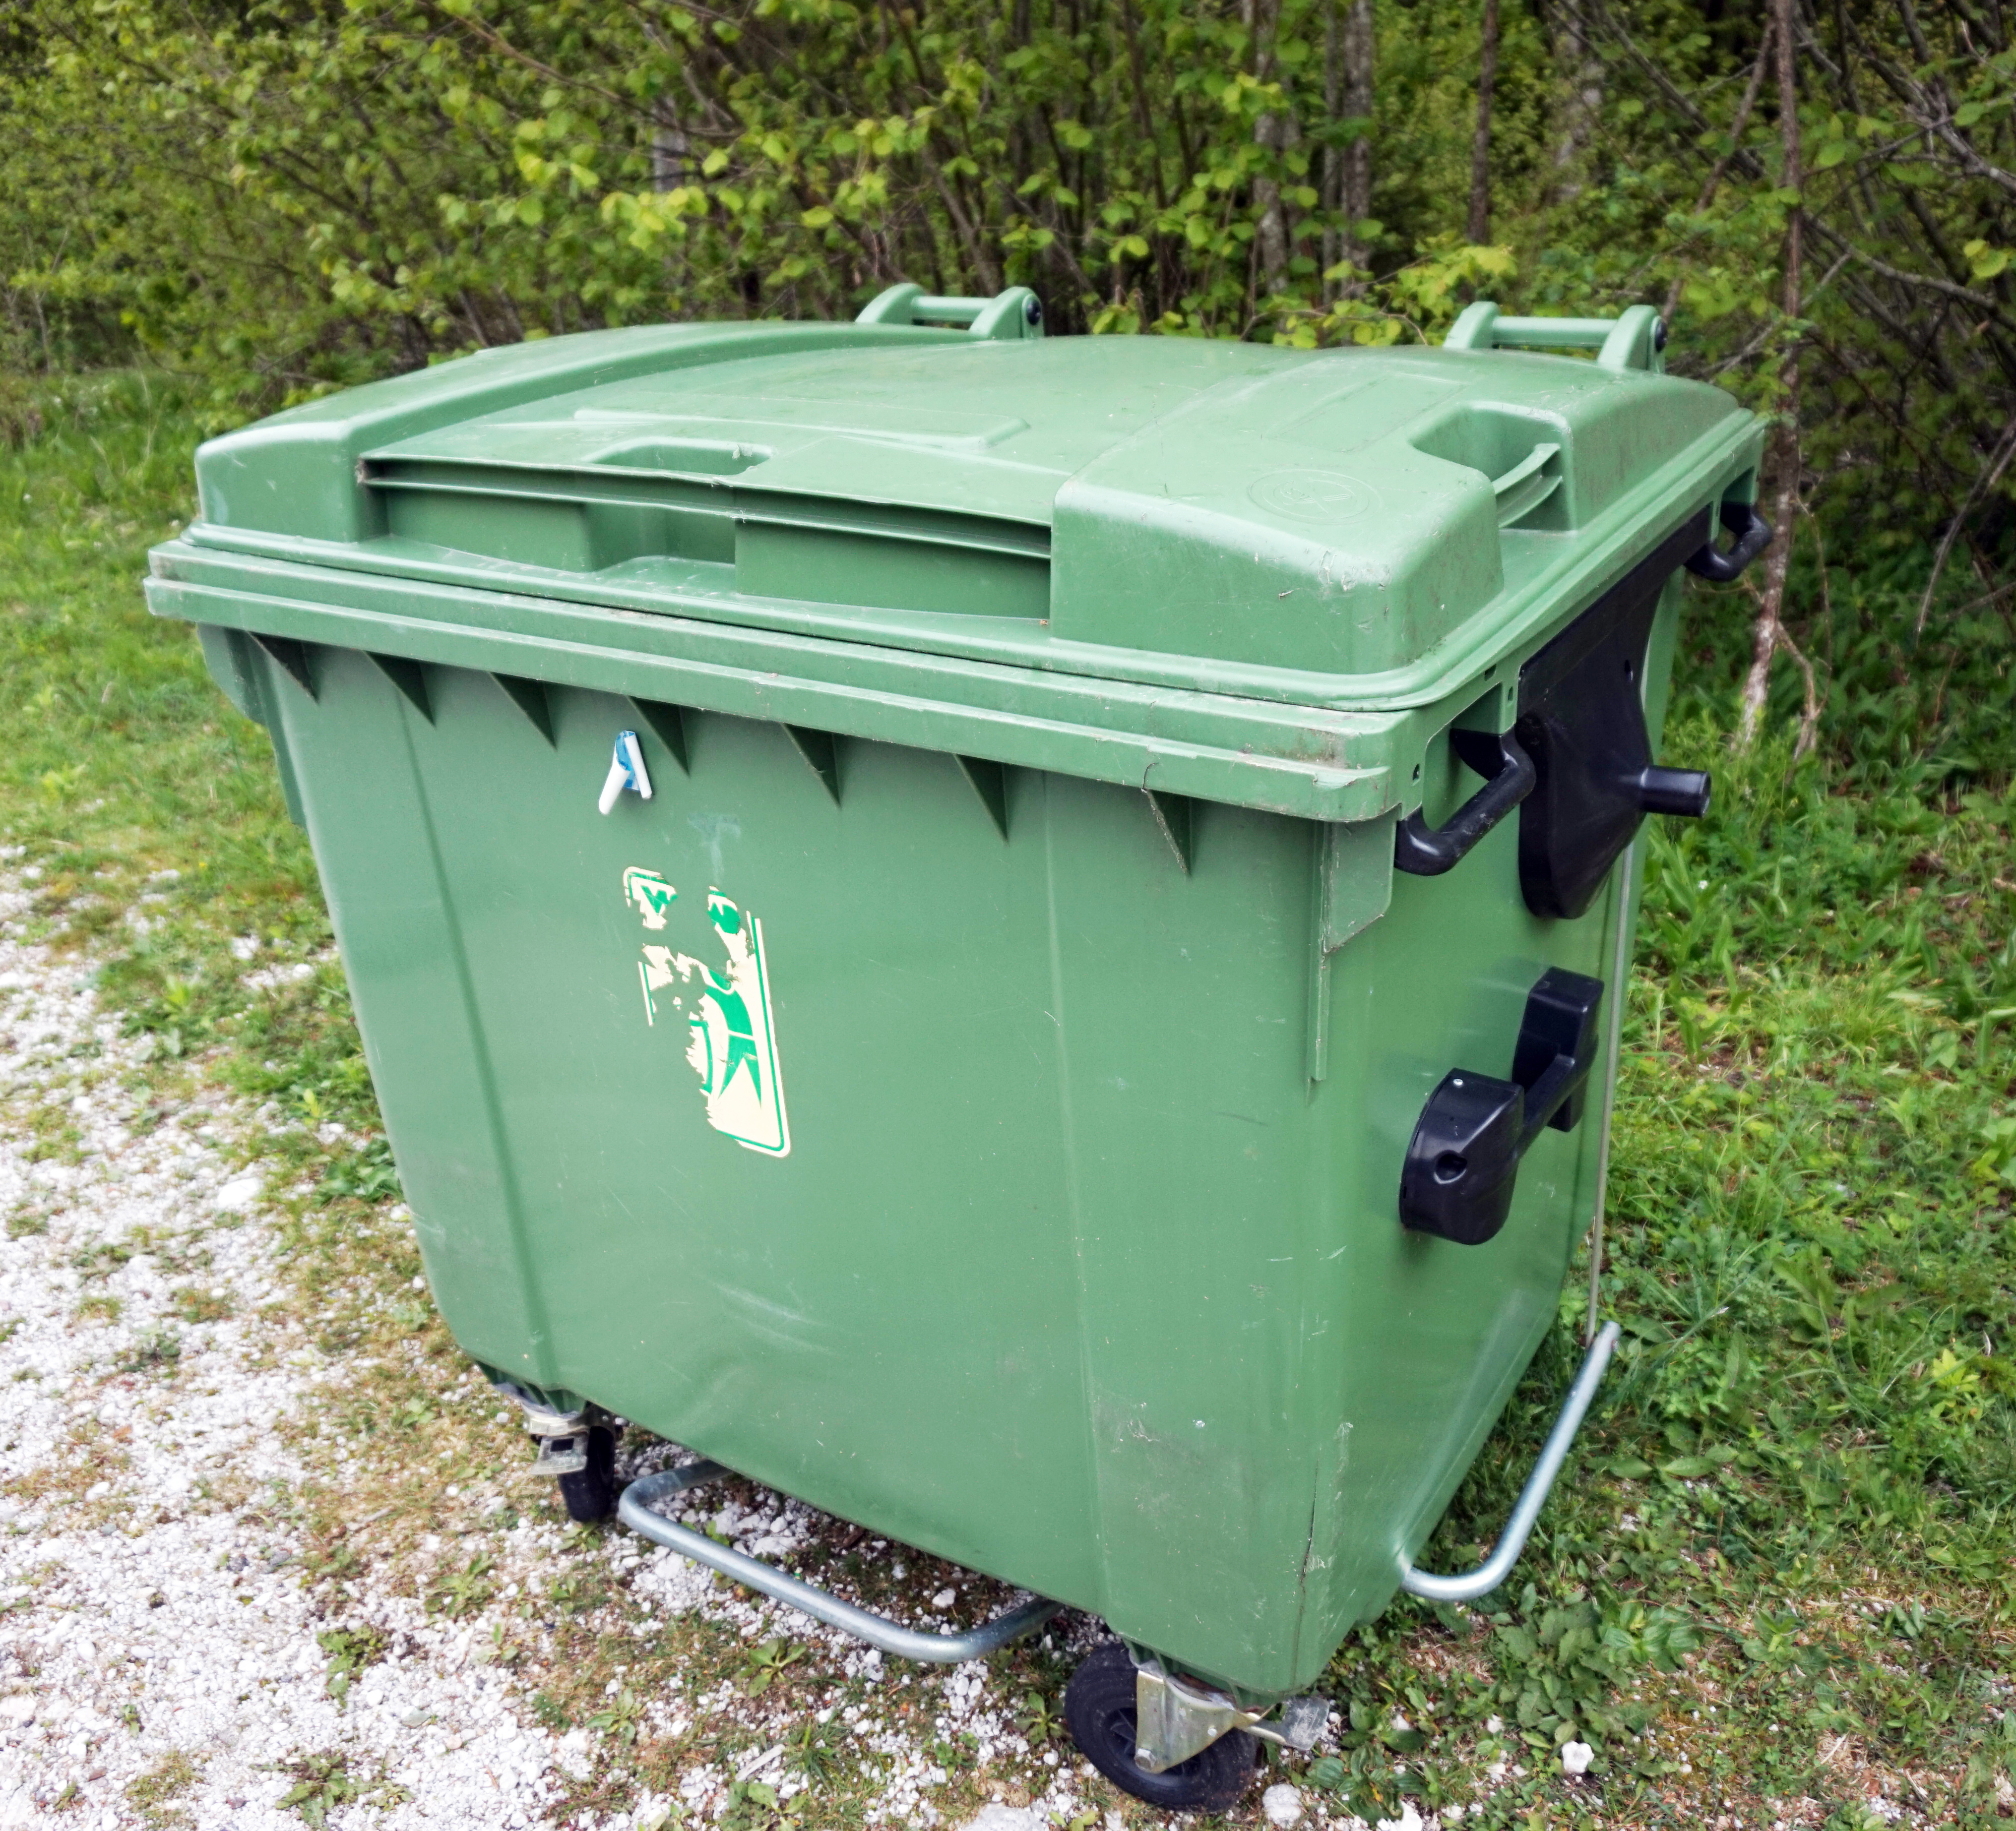 File:Trash container.JPG - Wikimedia Commons